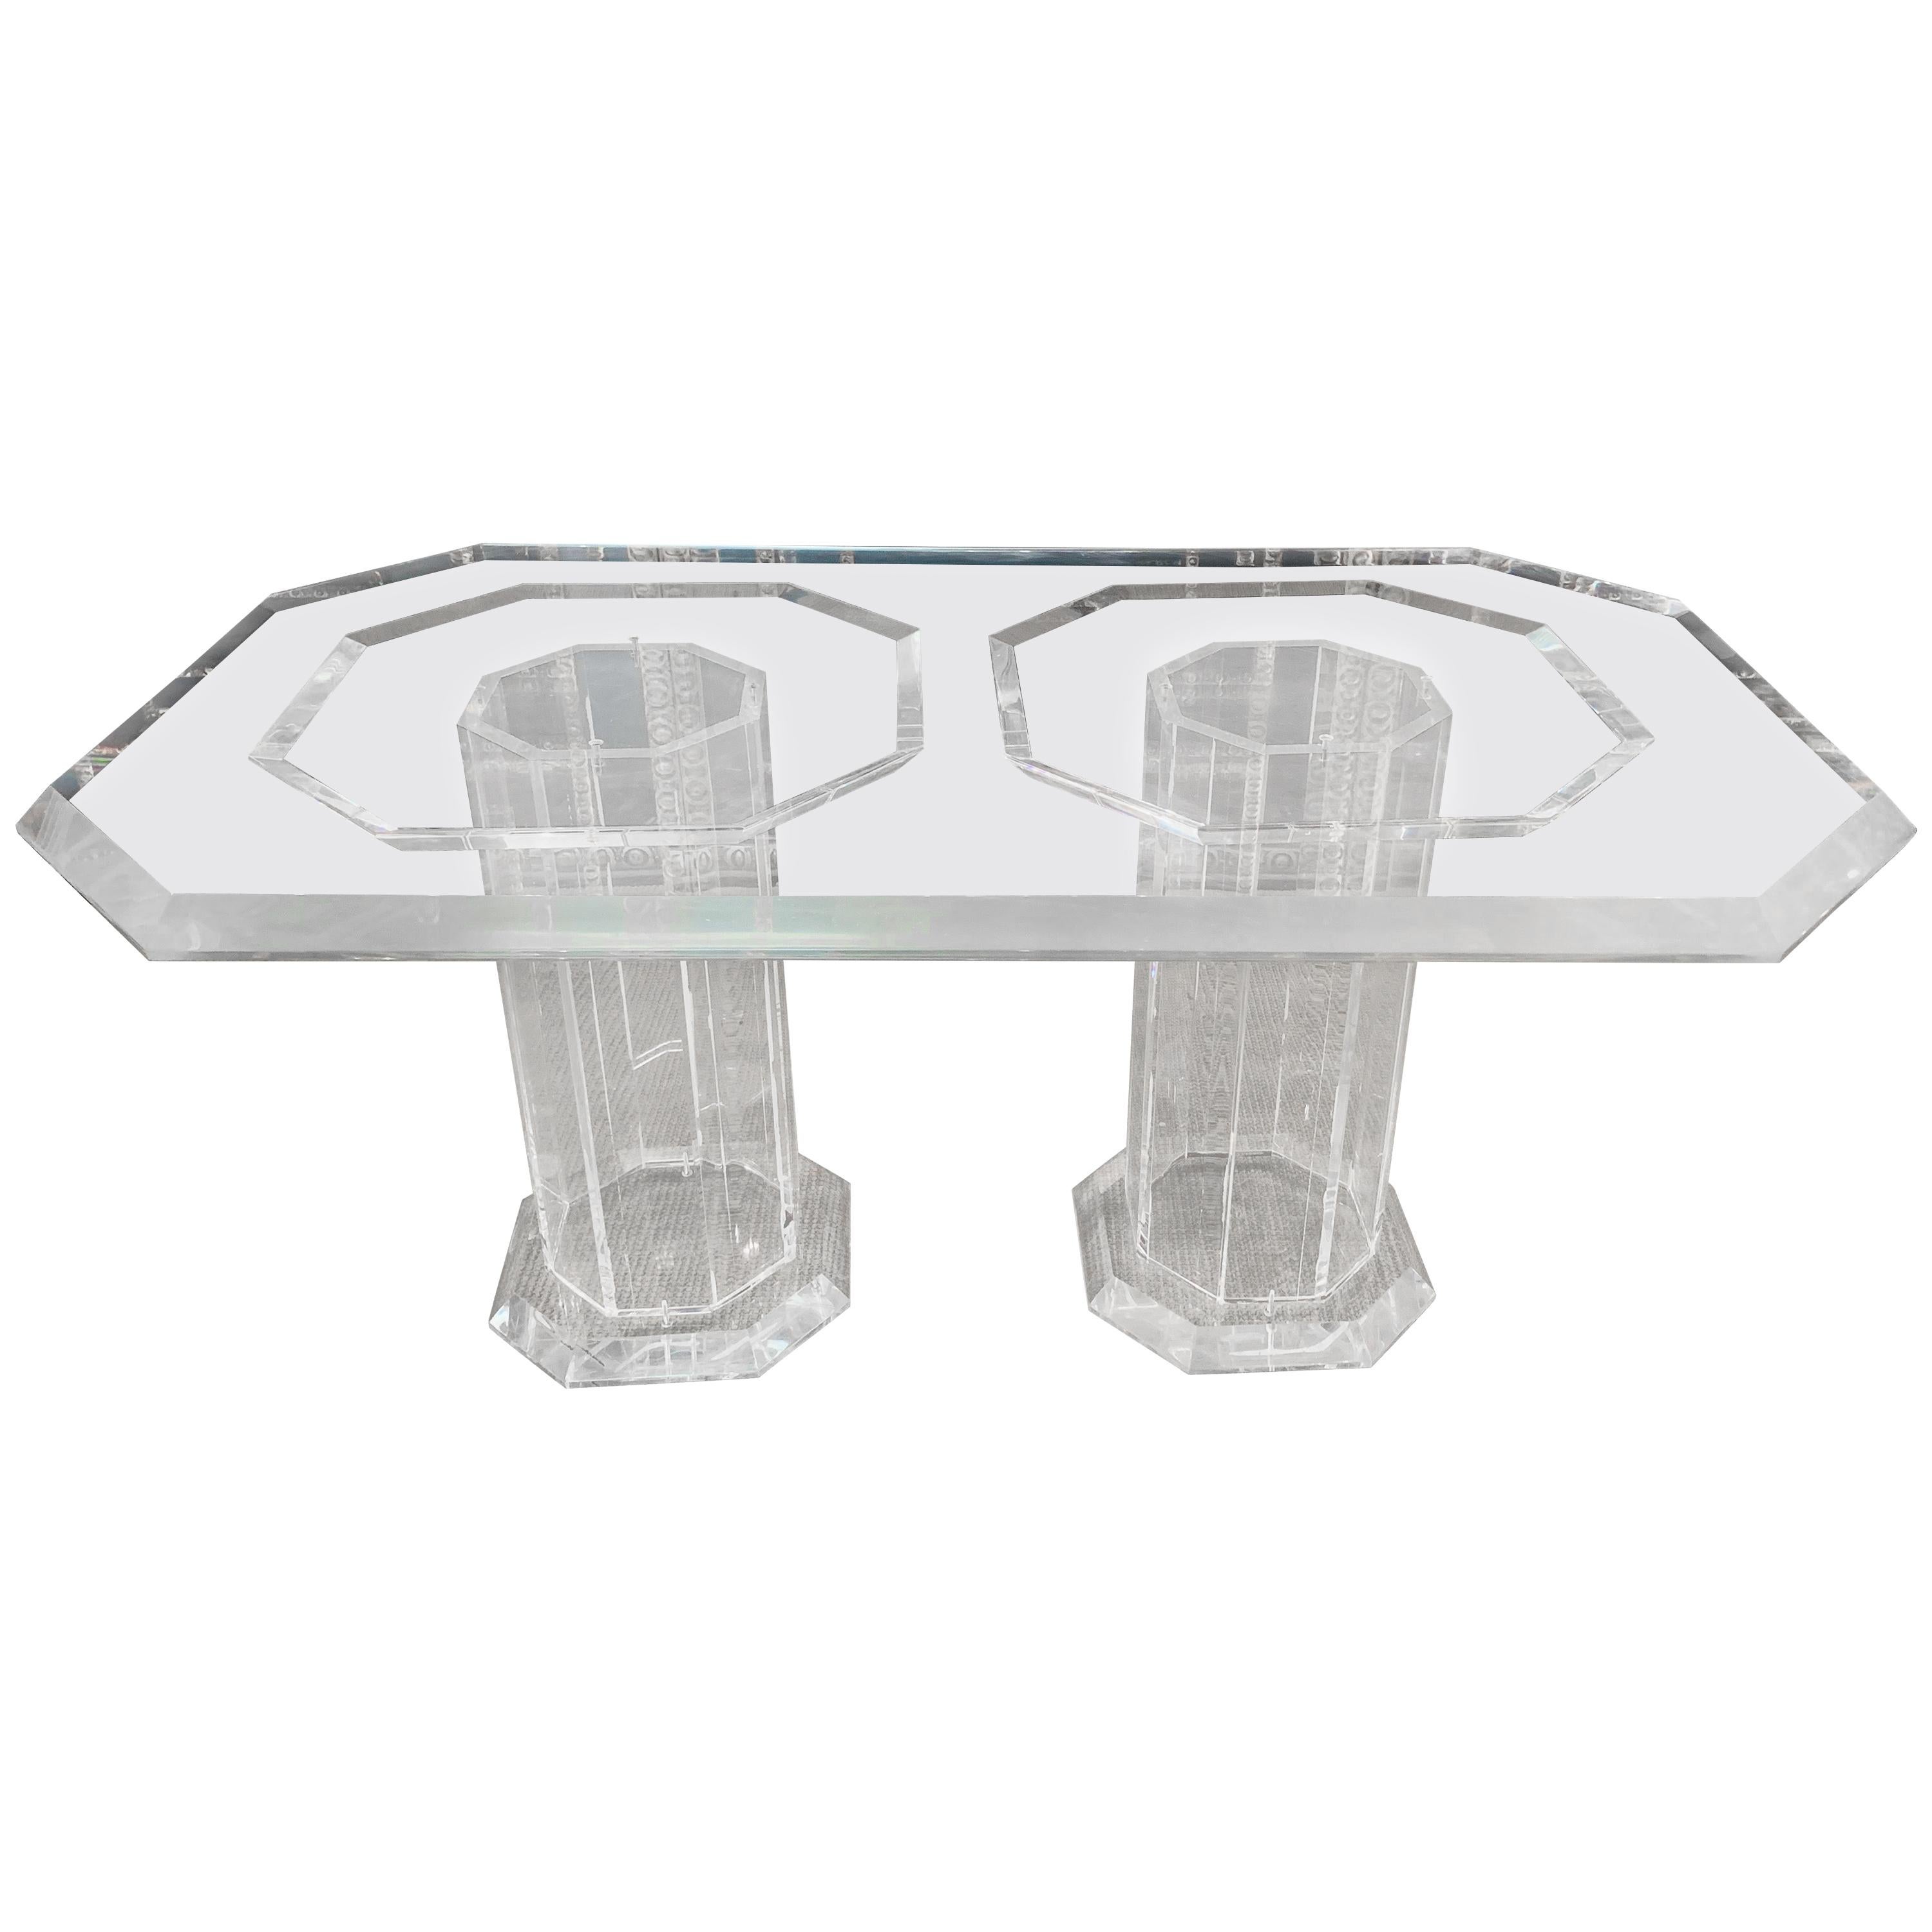 Very High Quality, Elegant, Massive Luxury Dining Table with 2 Columns